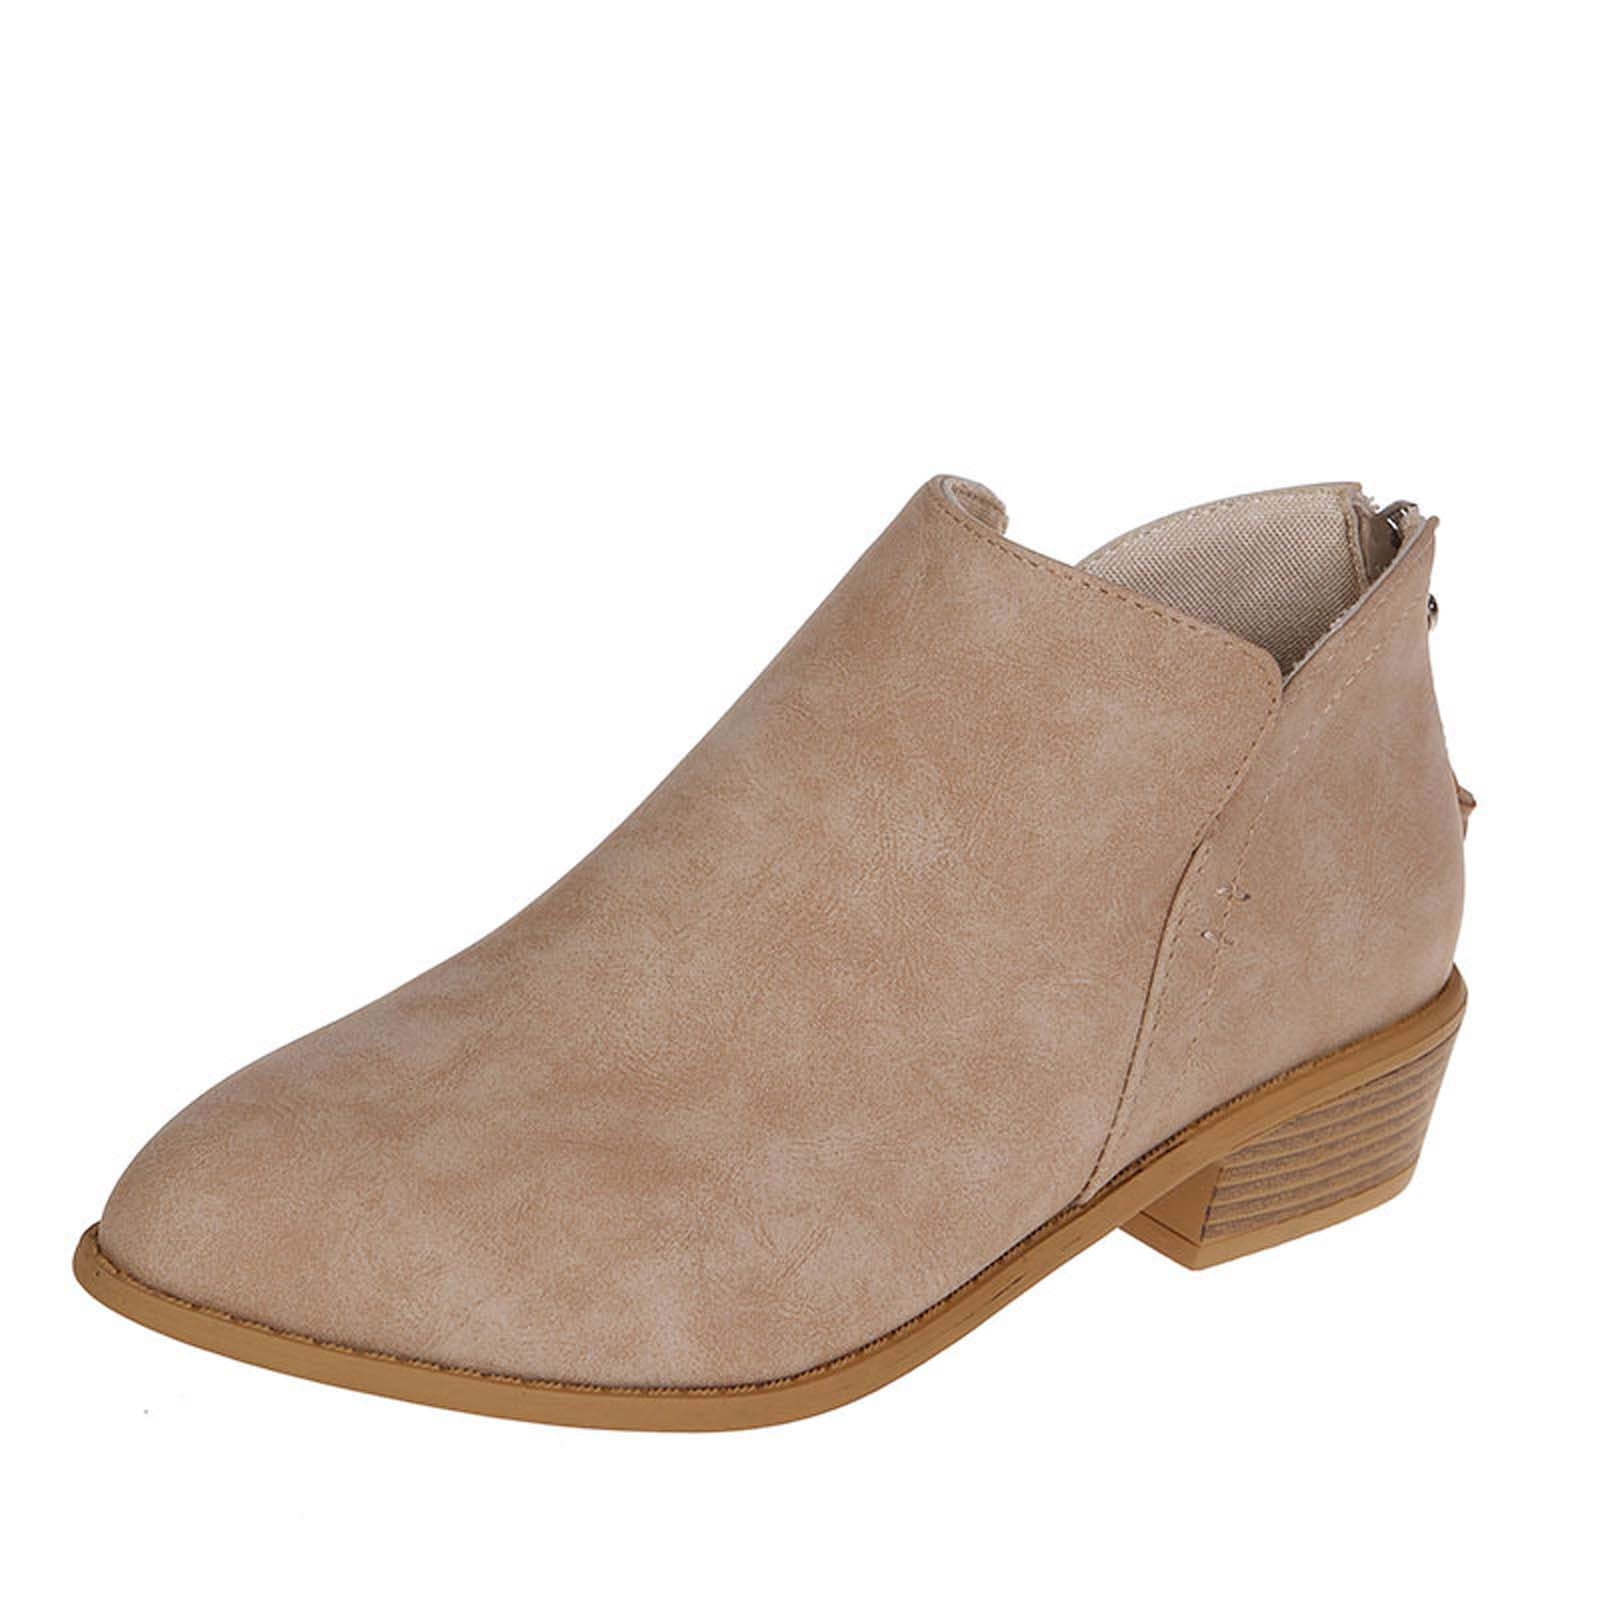 Ankle Boots for Women Chunky Stacked Heel Faux Suede Round Toe Slip on Western Booties Cut Out Short Boots - Walmart.com